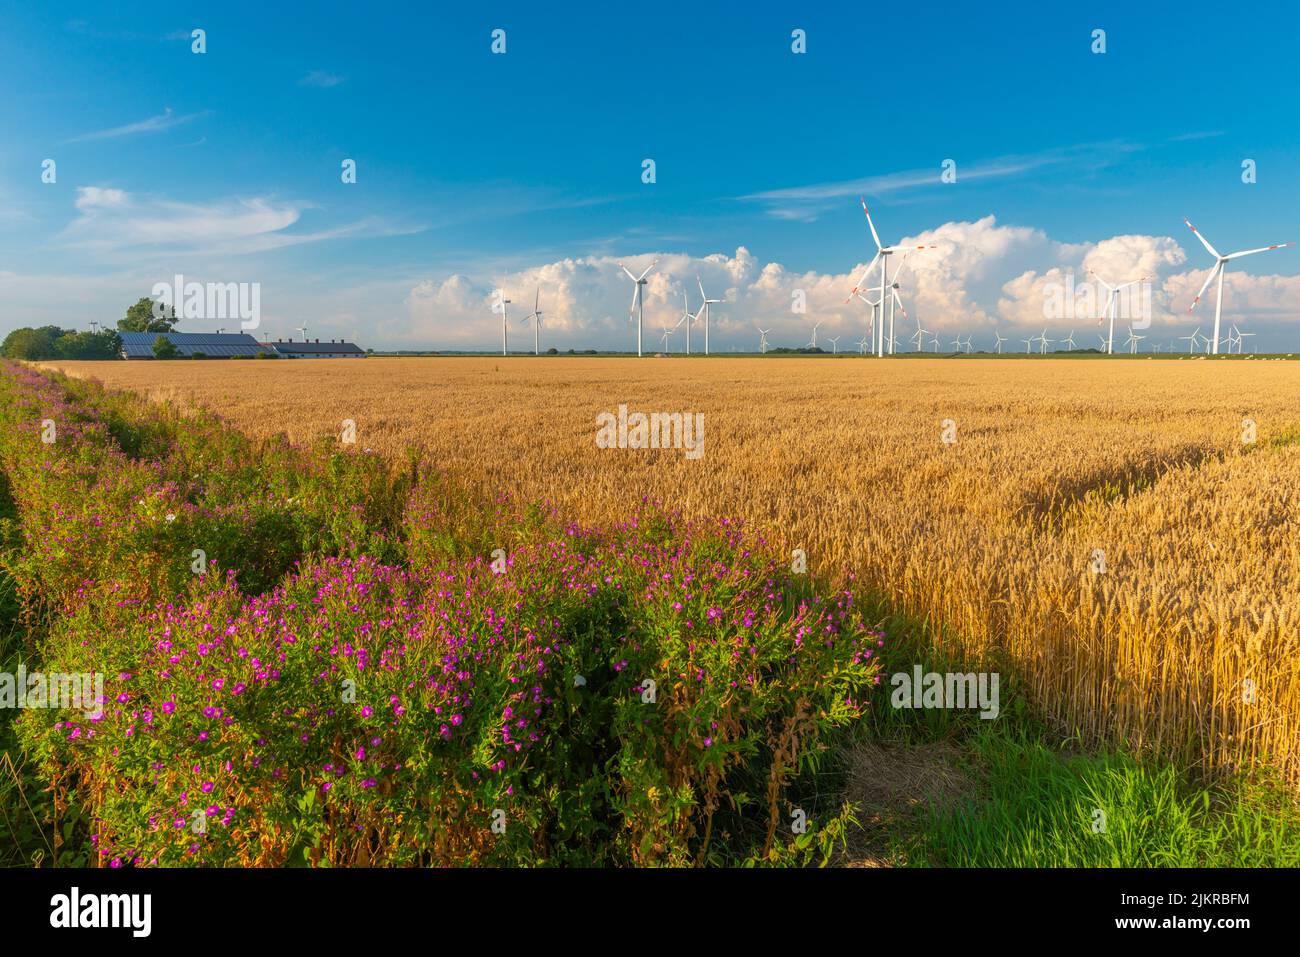 Agriculture and wind power plant in the marshes of Reußenköge, North Frisia, North Sea, Schleswig-Holstein, Northern Germany, Stock Photo